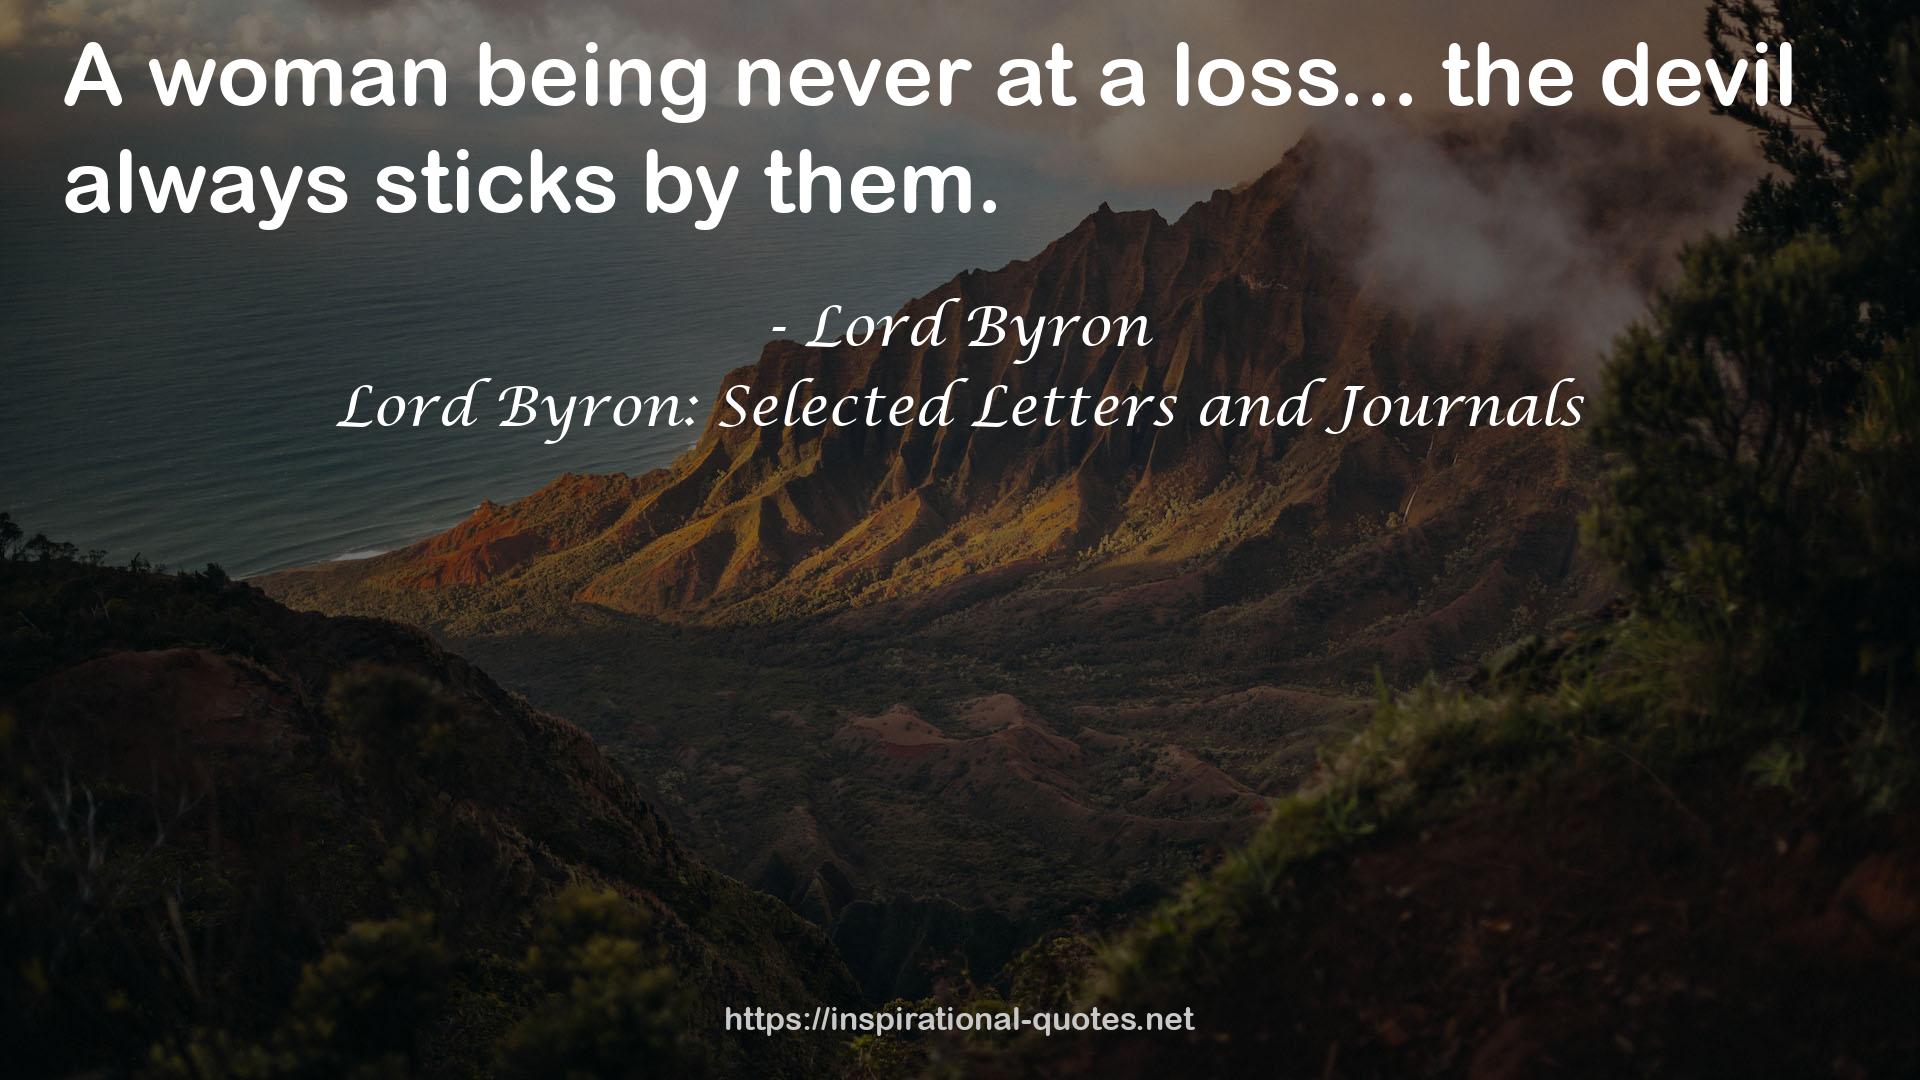 Lord Byron: Selected Letters and Journals QUOTES